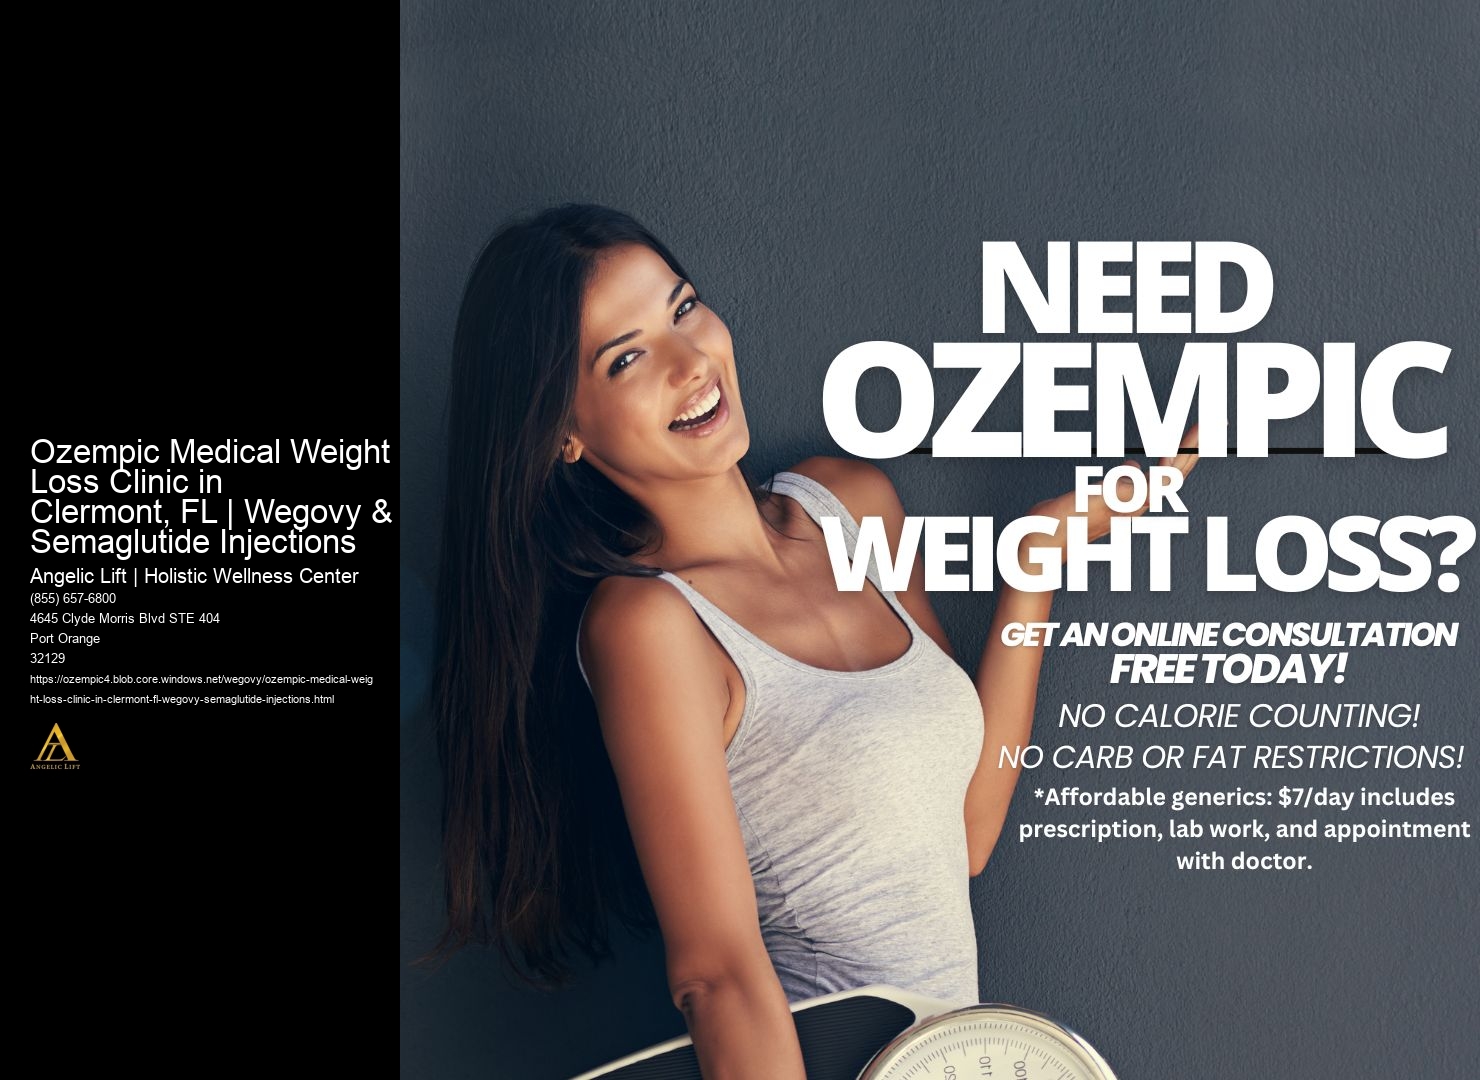 Ozempic Medical Weight Loss Clinic in Clermont, FL | Wegovy & Semaglutide Injections